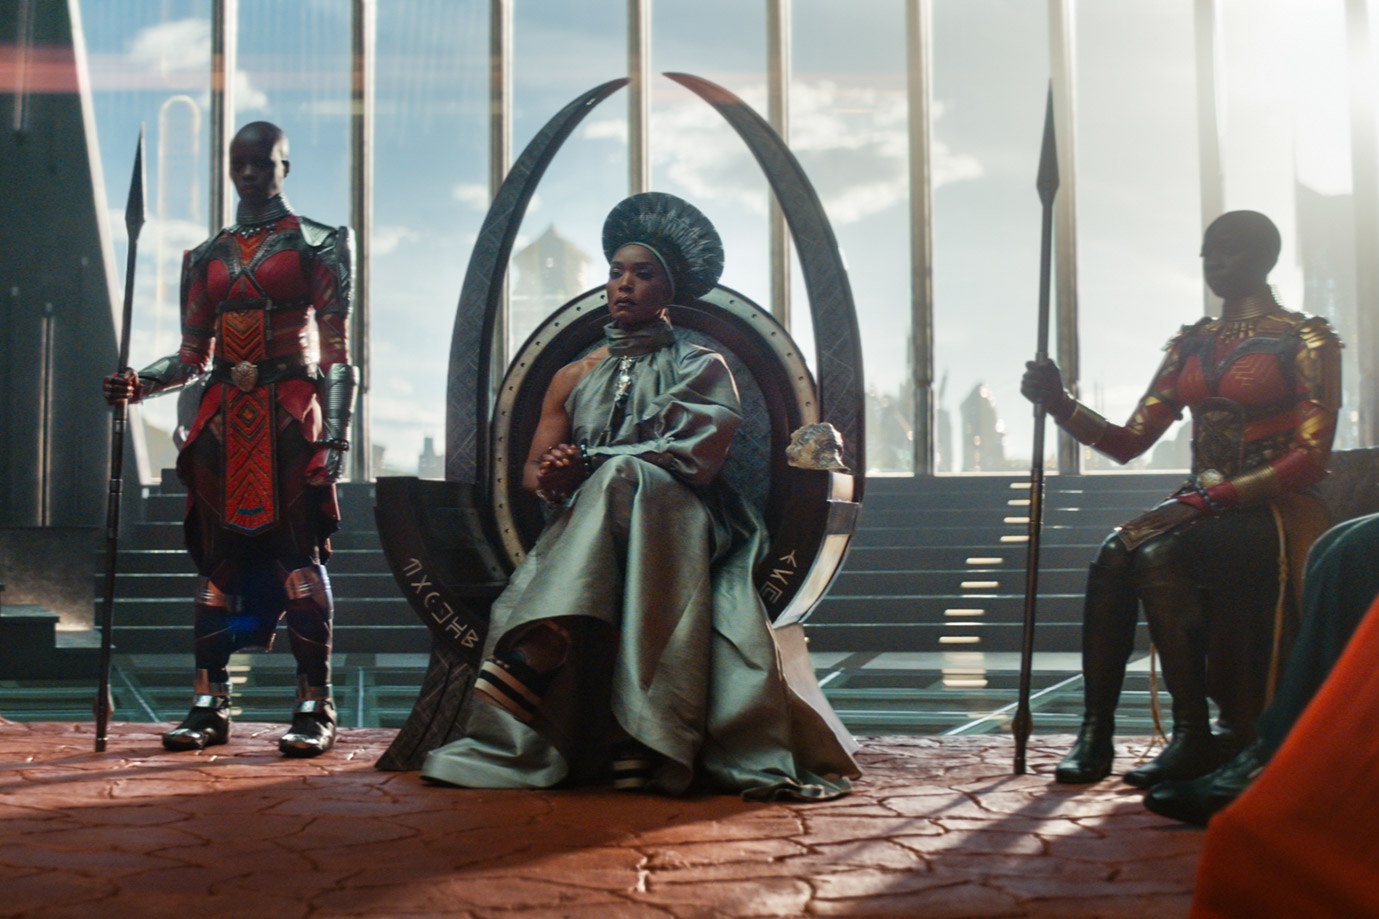 Box Office Mojo - Thursday Box Office 1. Ready Player One - $12 million 2.  Black Panther - $2.05 million 3. Pacific Rim 2 - $1.67 million Get the full  chart here